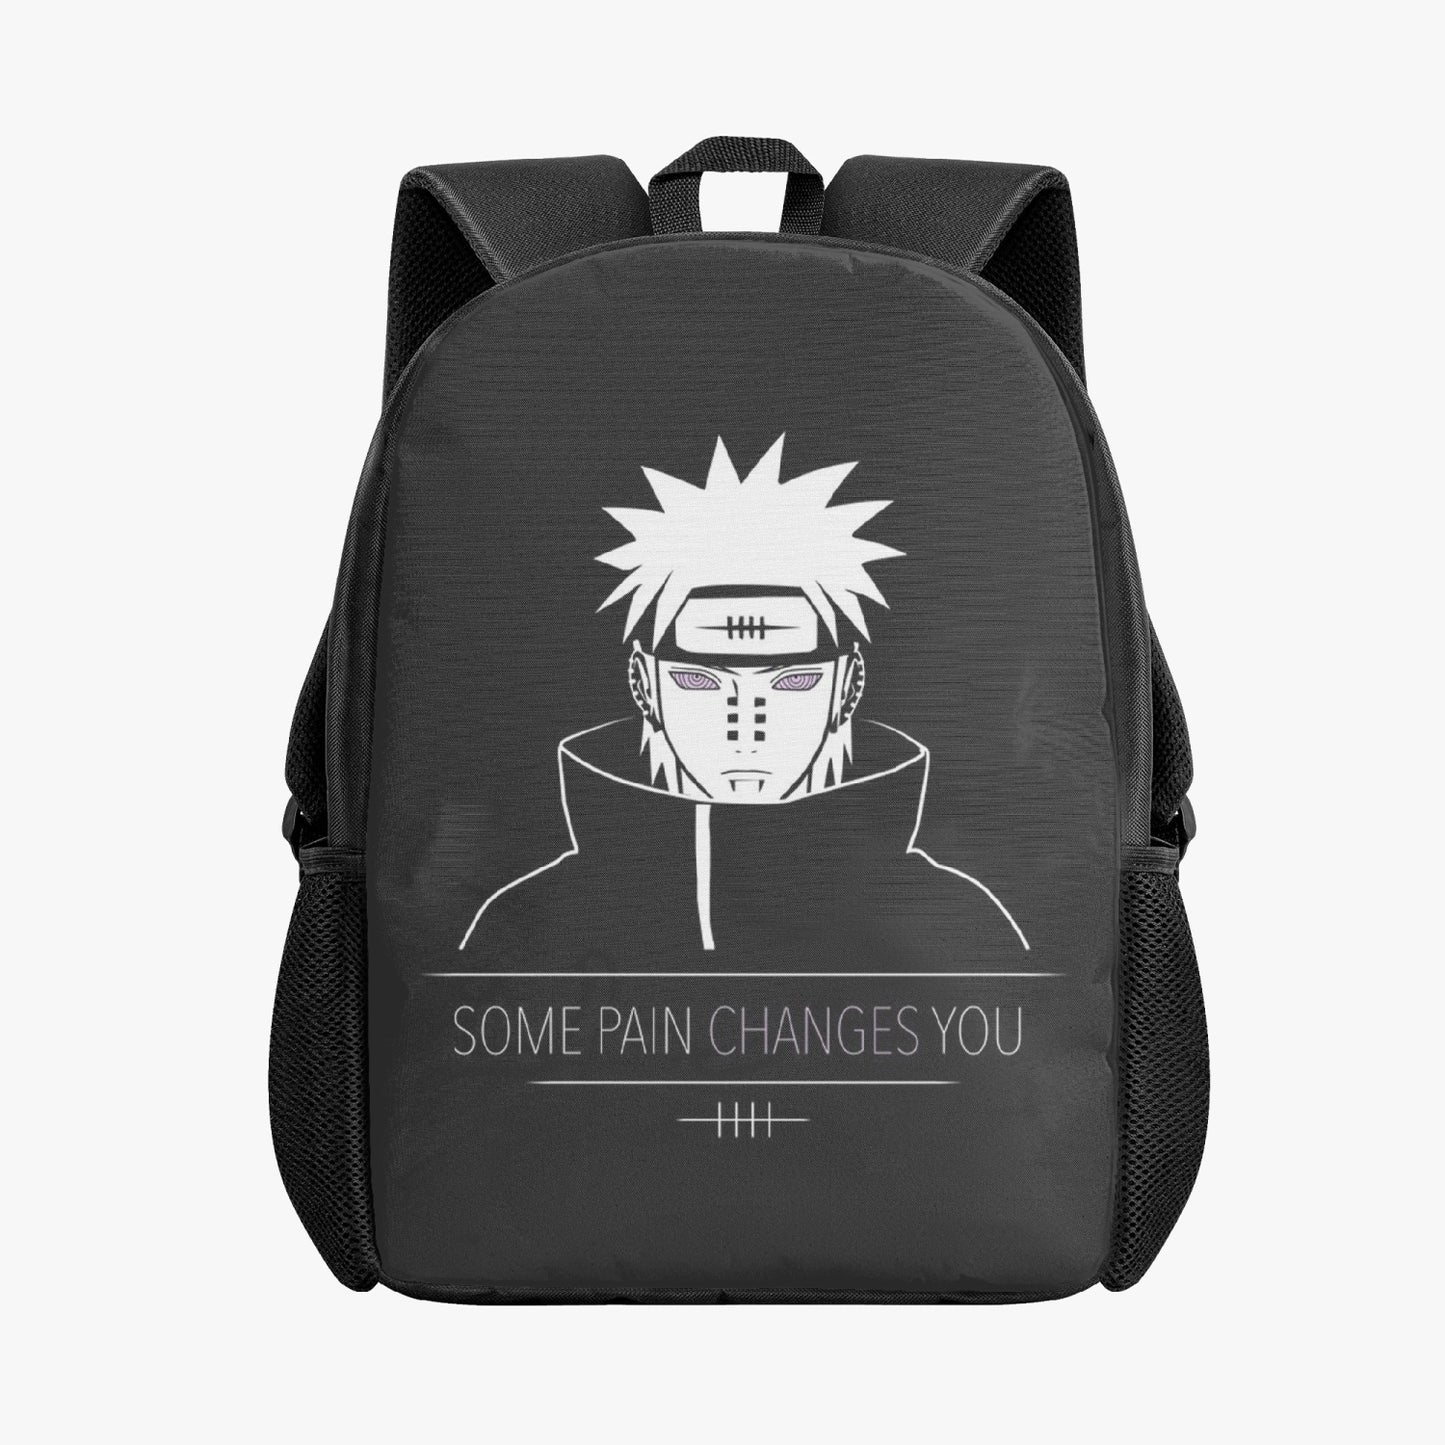 PAIN Laptop Backpack